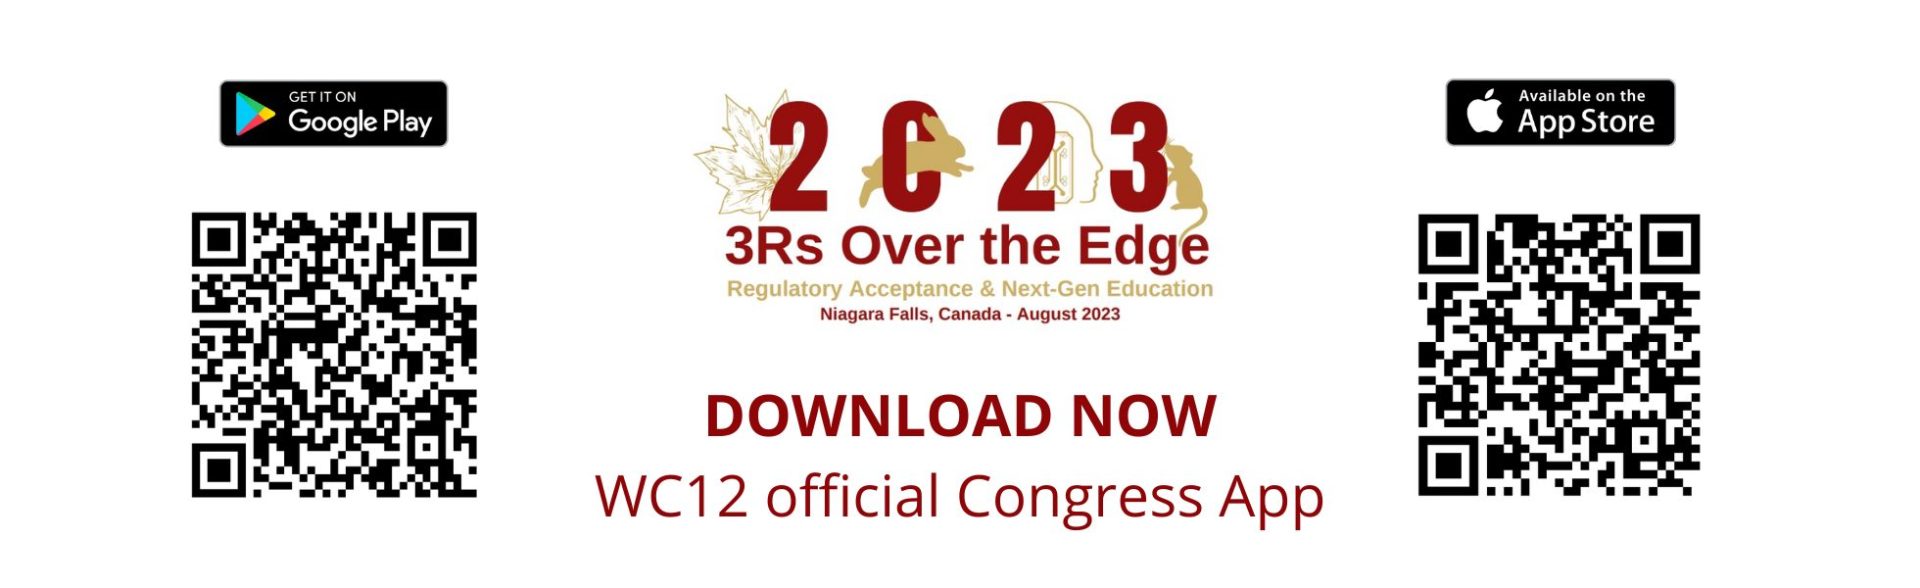 Download now! WC12 official Congress App